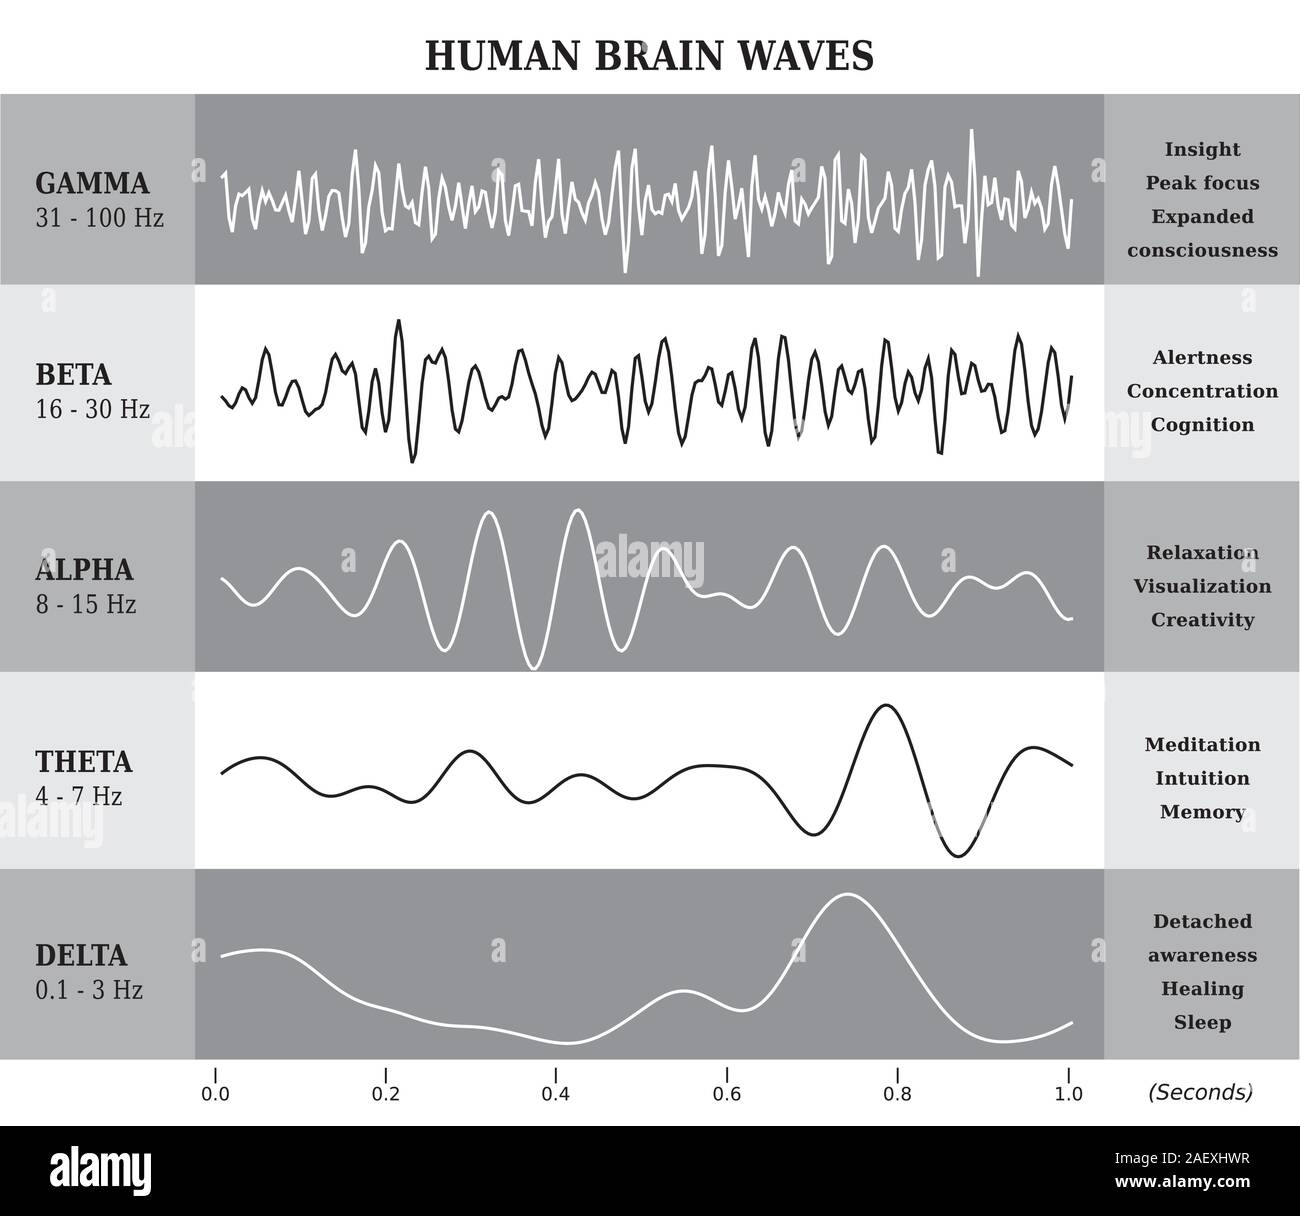 Human Brain Waves Diagram, lllustration in Black and White - English Language Stock Vector